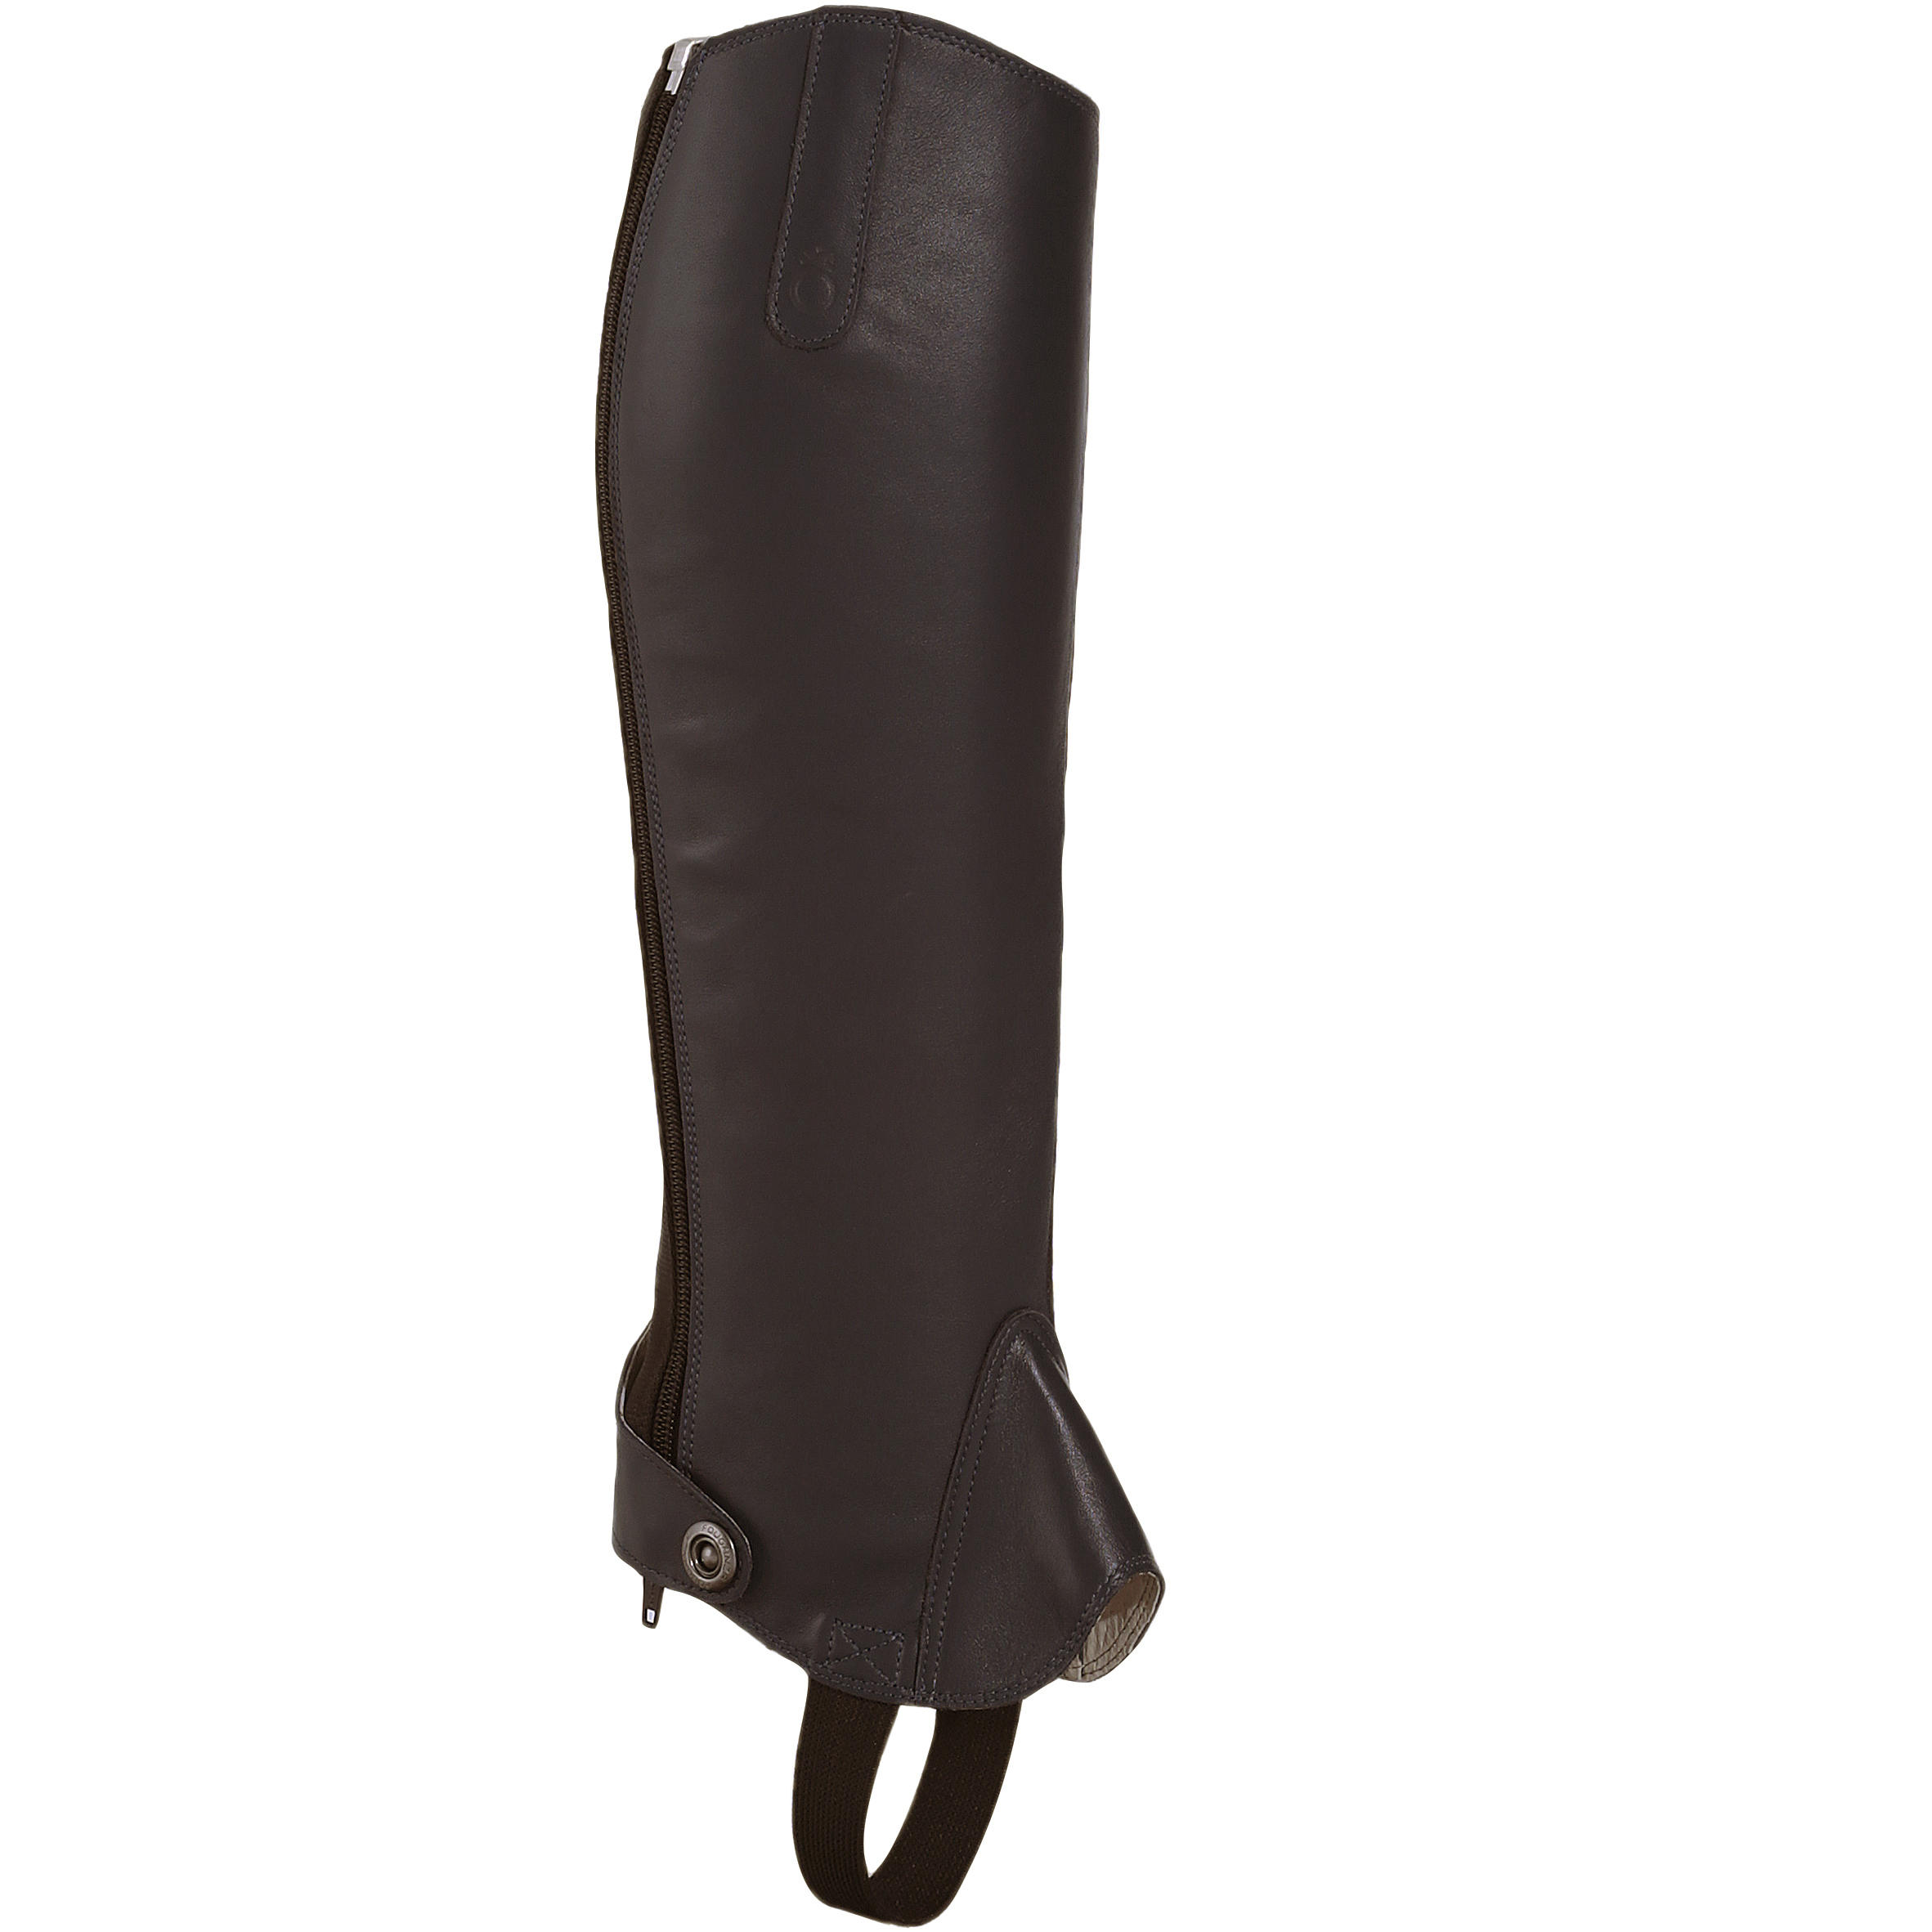 Paddock 700 Adult Horse Riding Leather Half Chaps - Brown 1/10